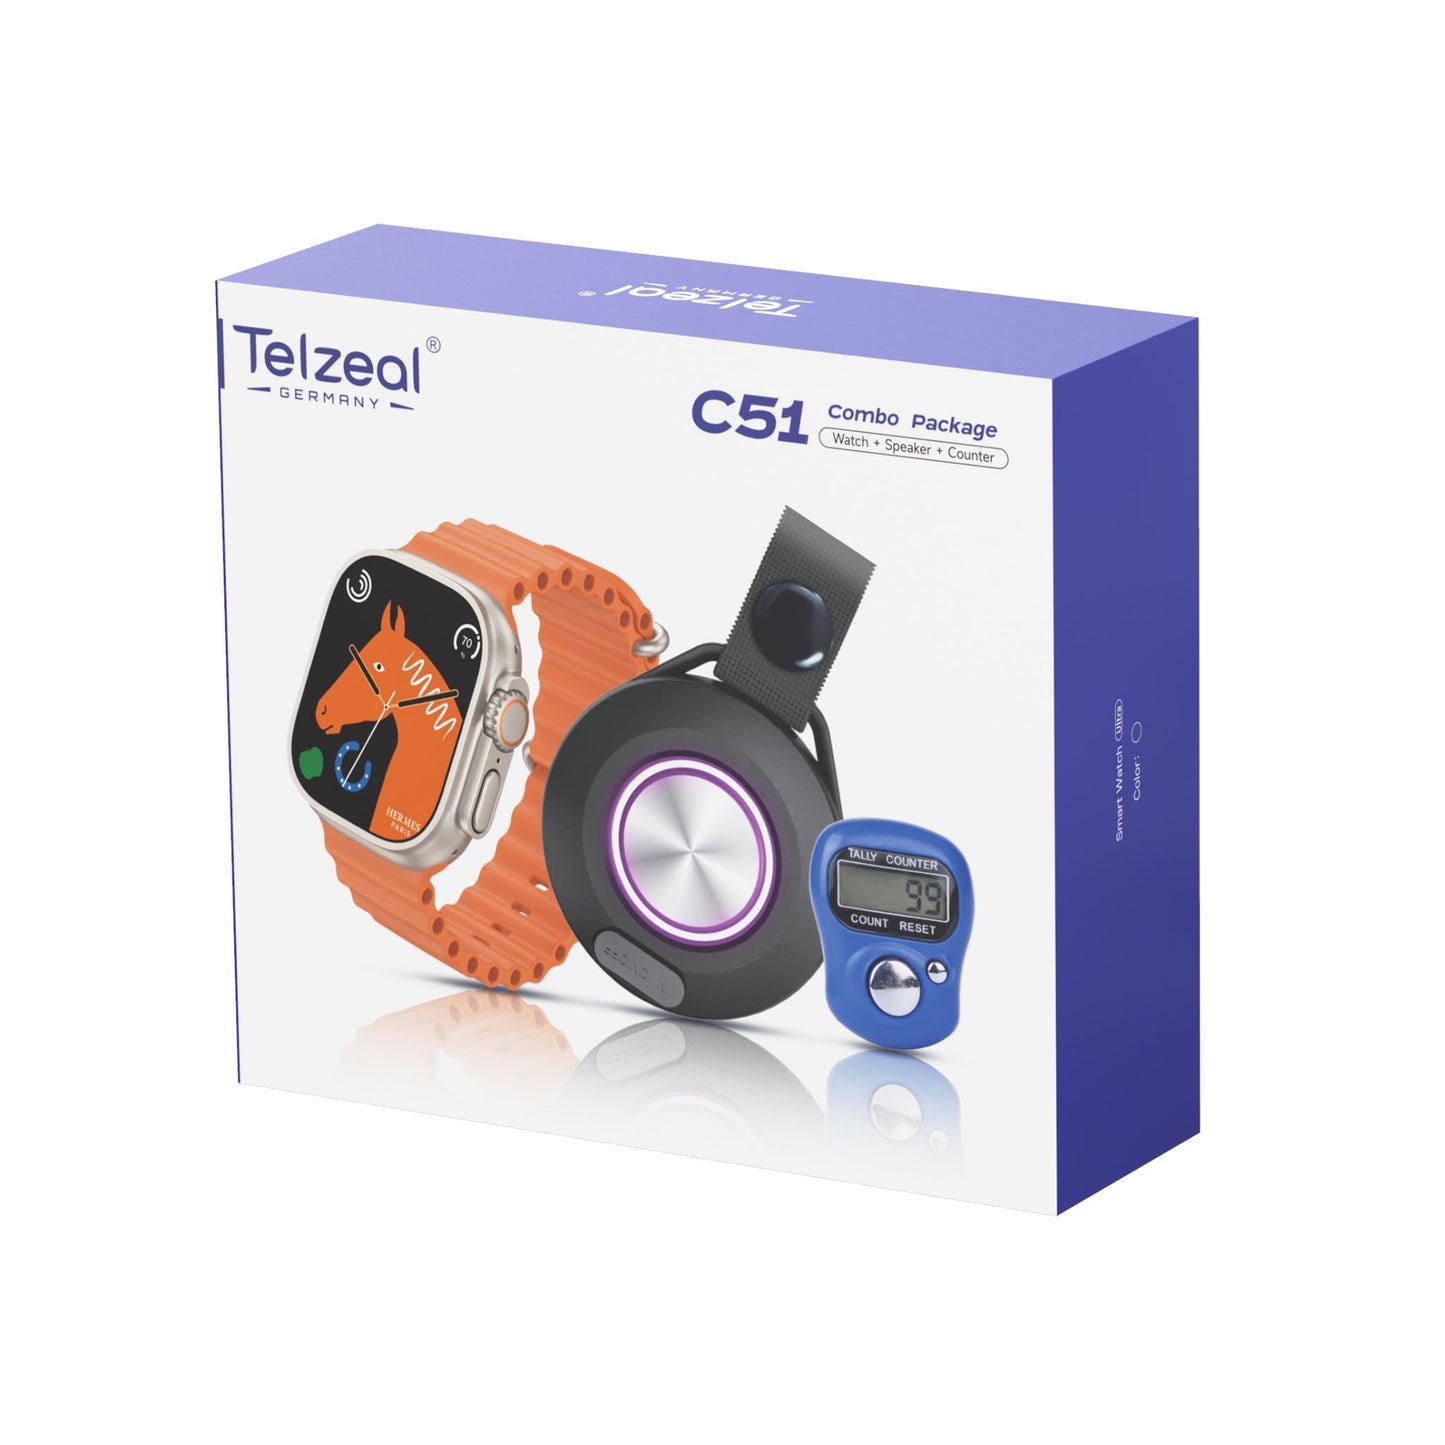 Telzeal C51 Combo Package (Watch+Speaker+Counter)_Silver